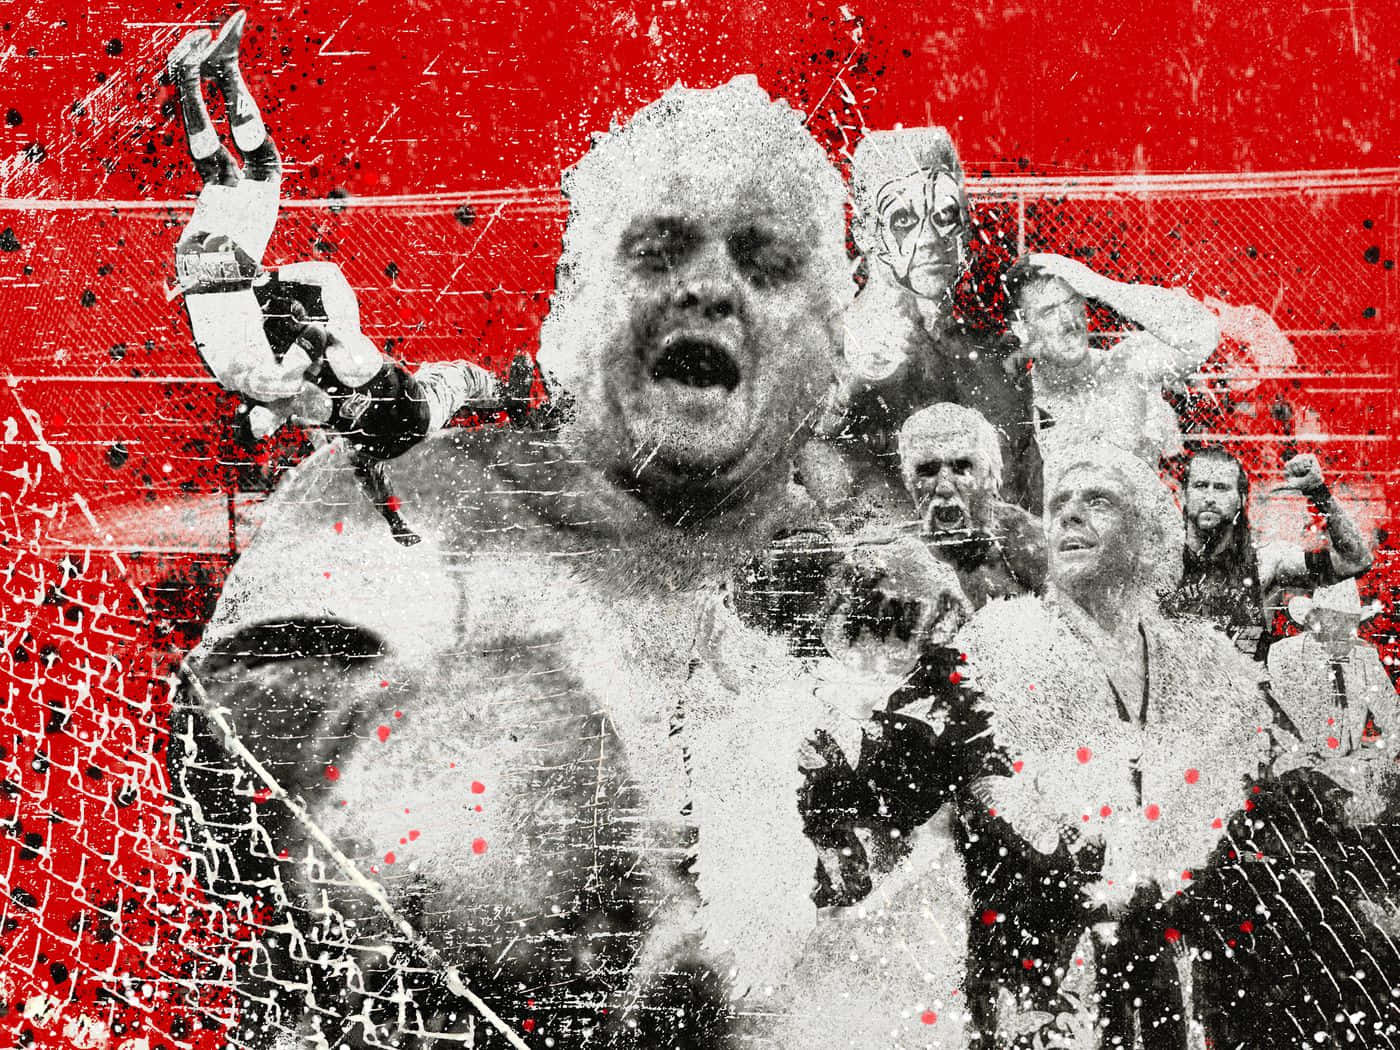 Cool Poster Of WWE Wrestlers With Sid Vicious Wallpaper